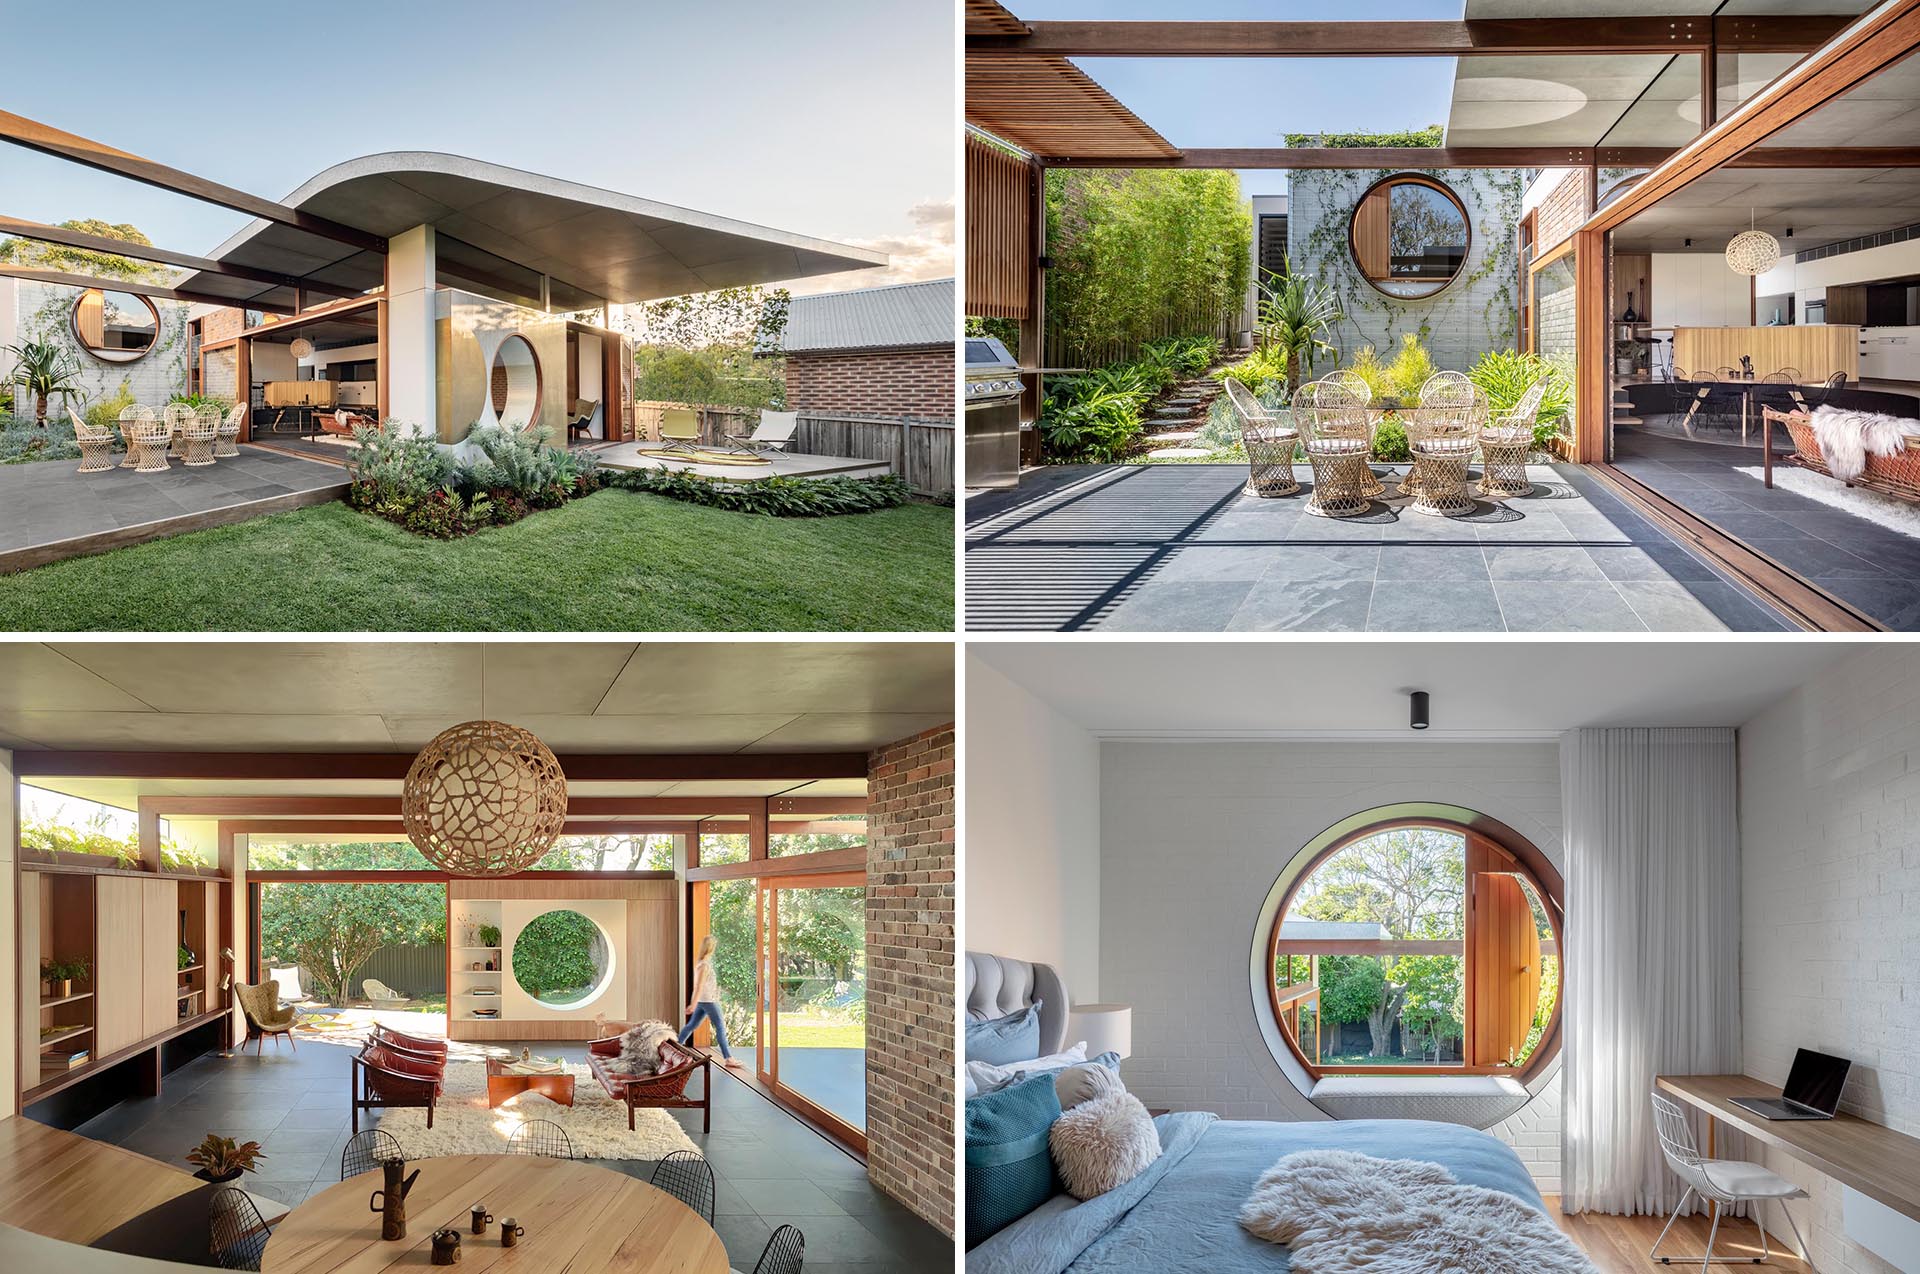 A rear home addition with circular accents, and designed for indoor / outdoor living.